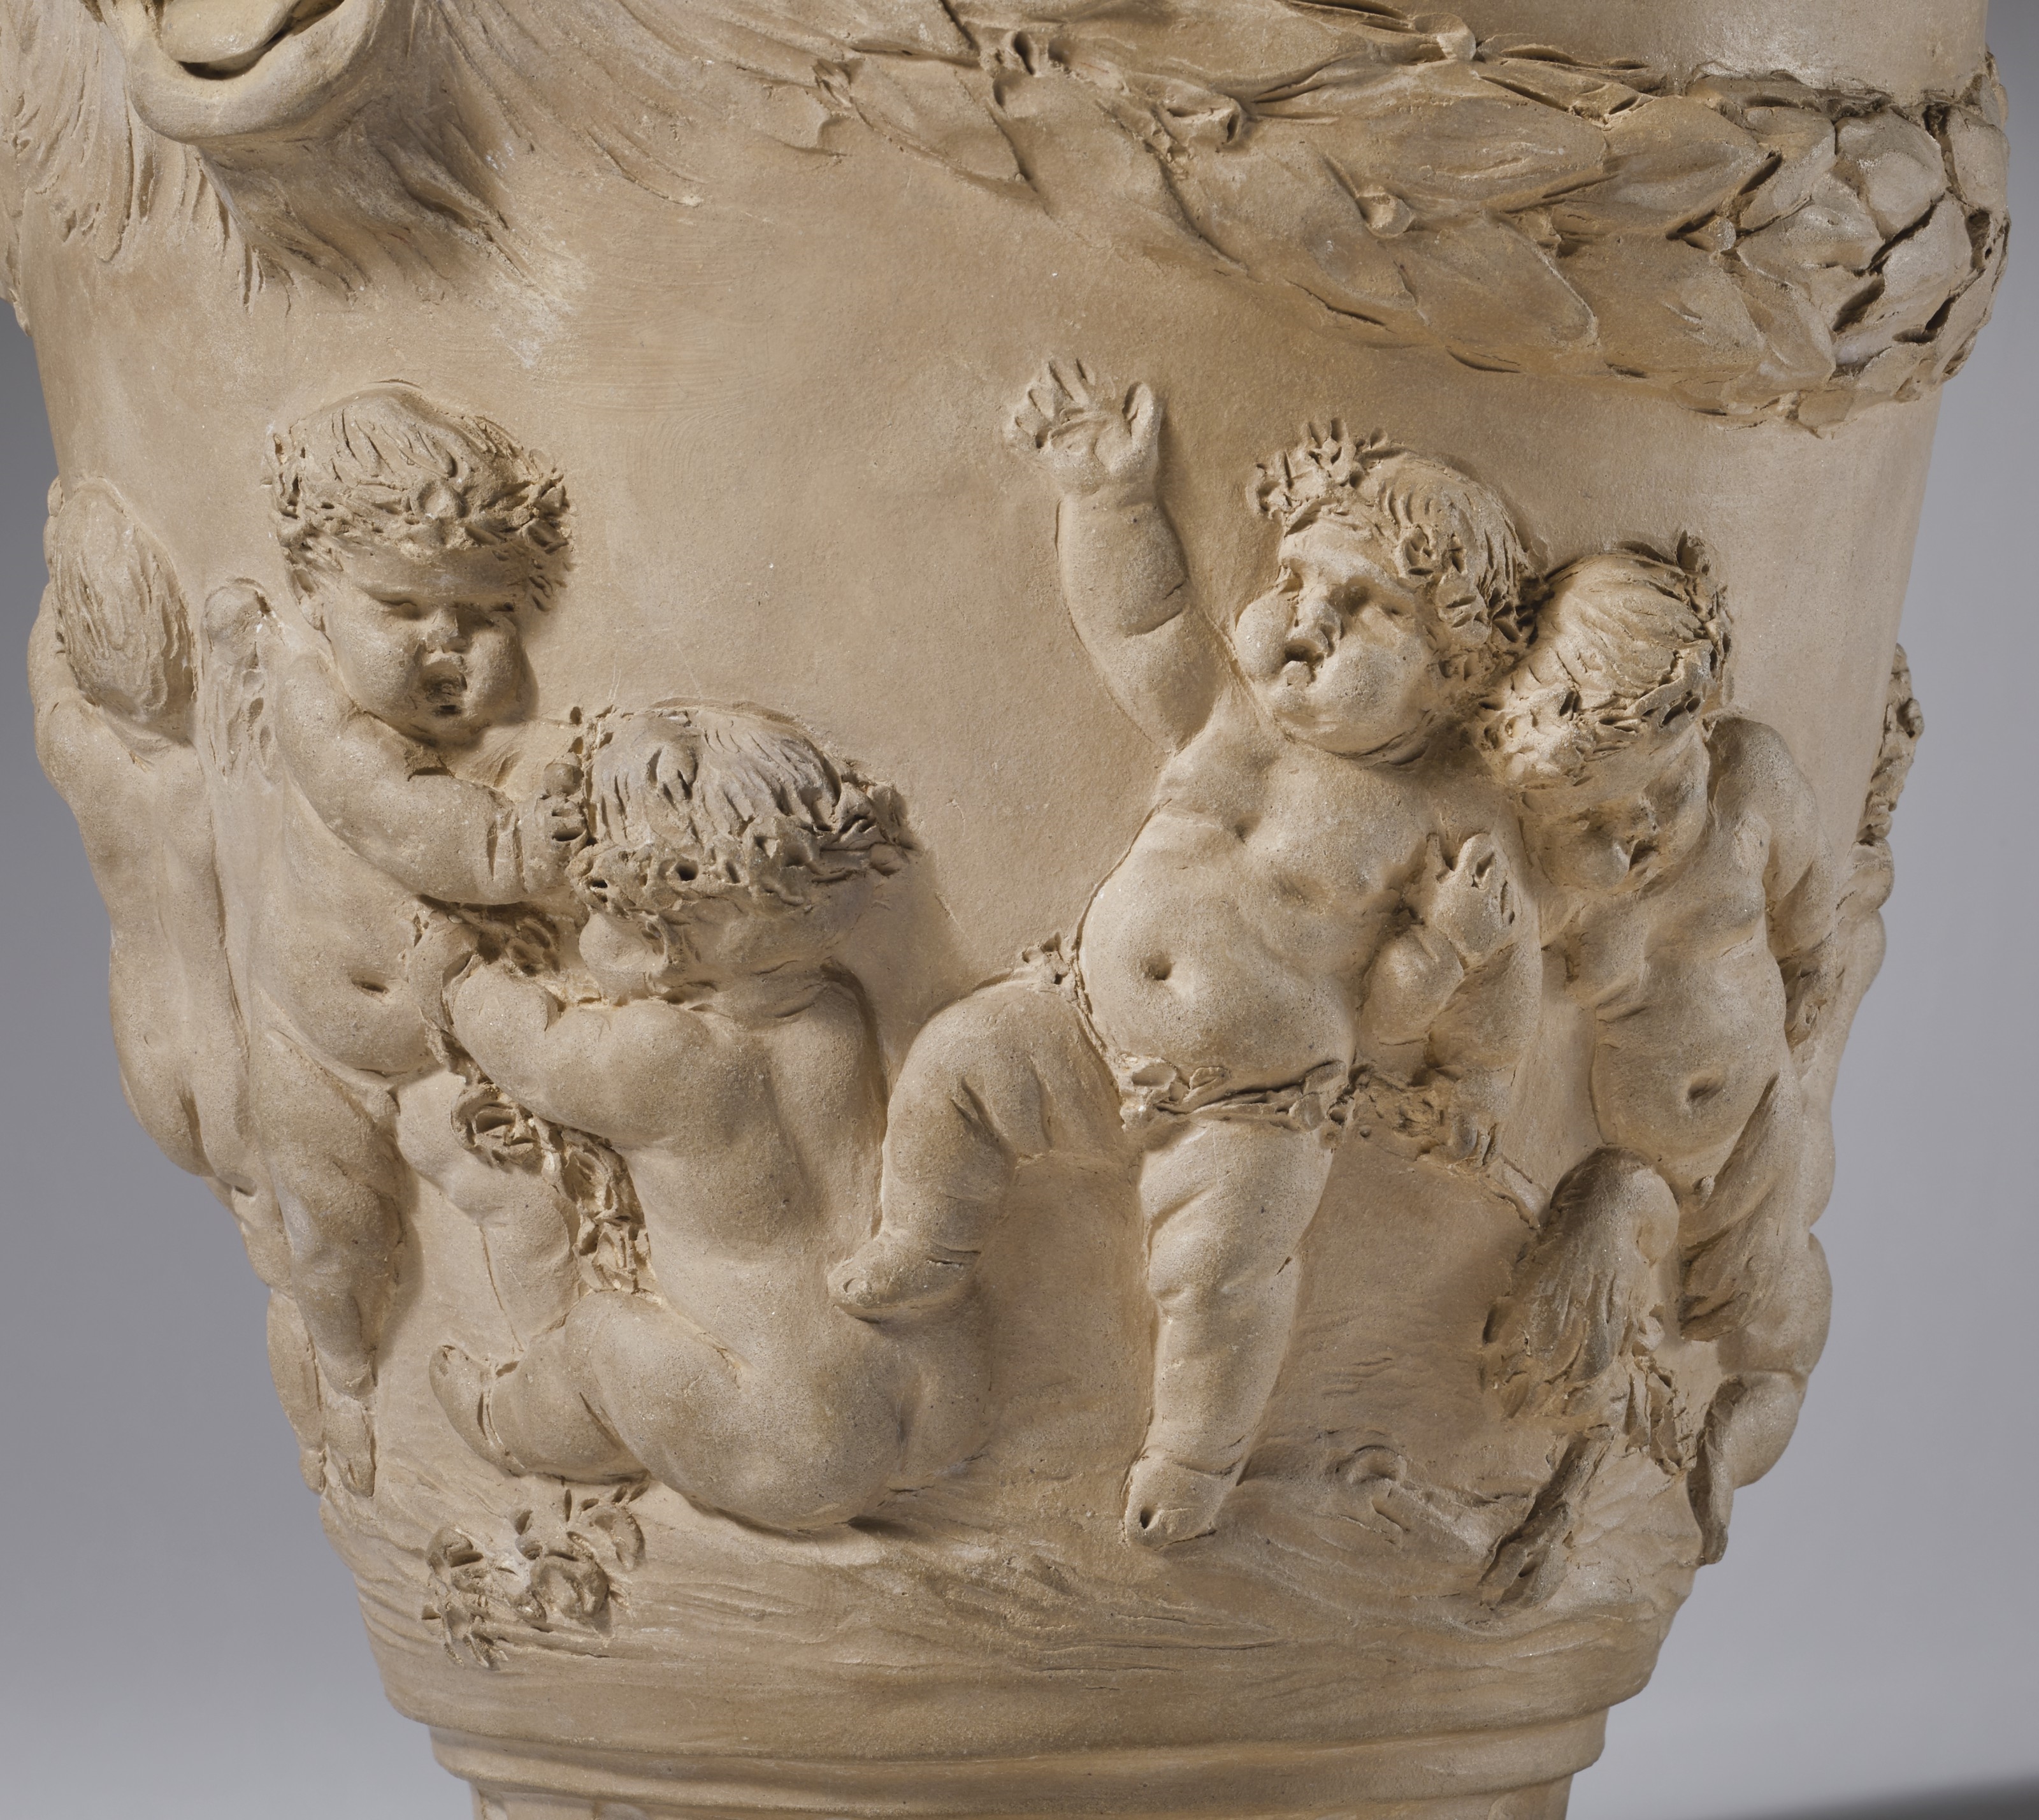 Artwork by Claude Michel Clodion, A TERRACOTTA VASE OF PUTTI WITH GROTESQUE HANDLES, Made of TERRACOTTA